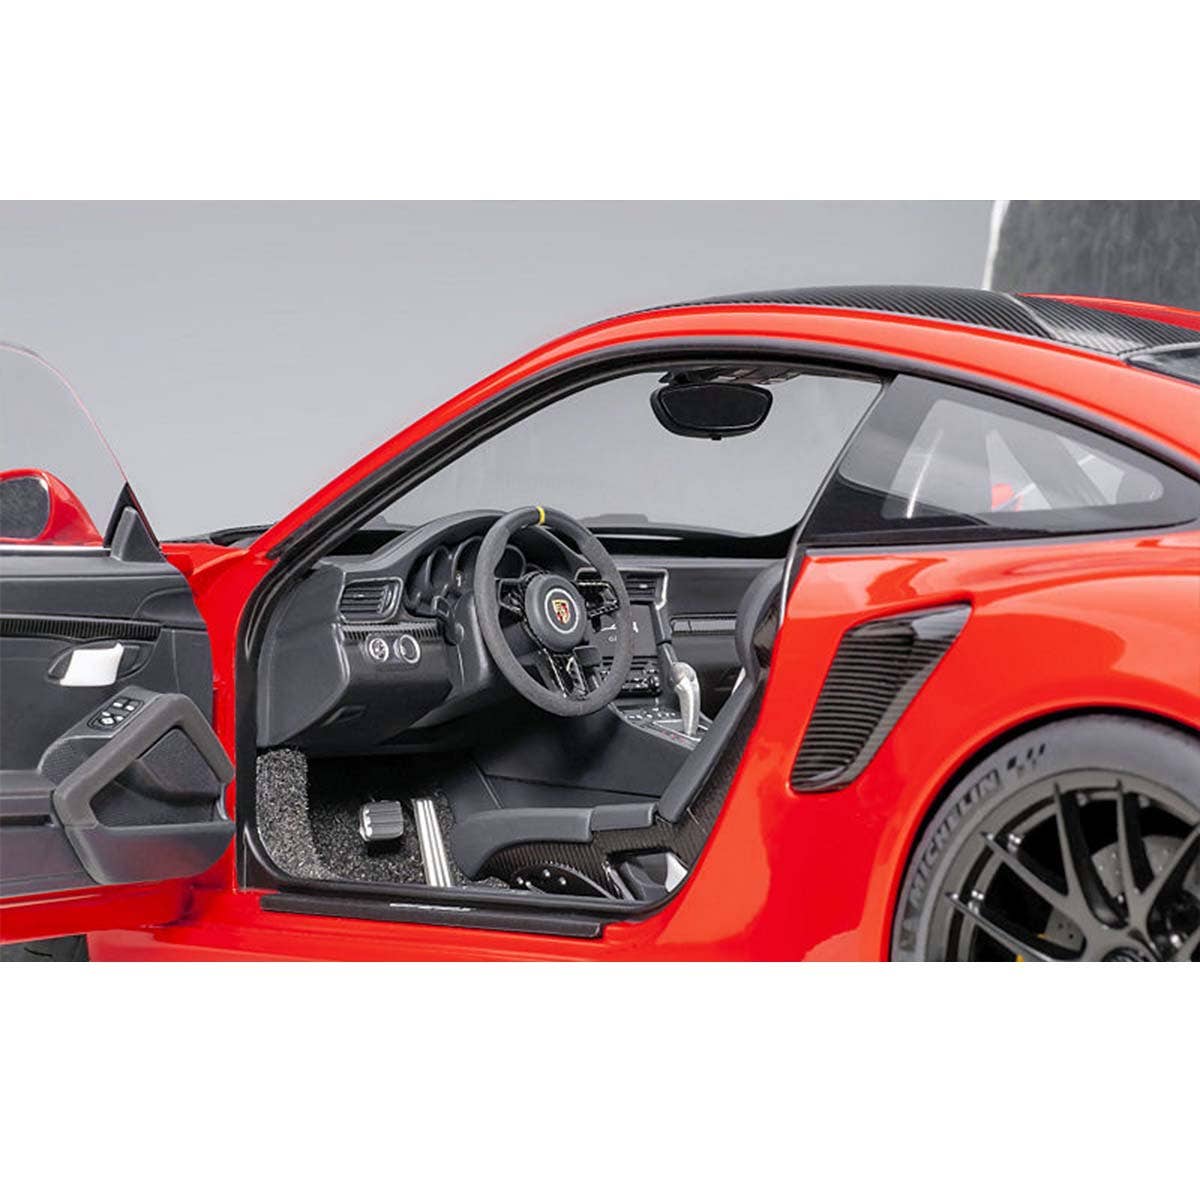 PORSCHE 911 (991.2) GT2 RS WEISSACH PACKAGE ( GUARDS RED ) - 1:18 Scale Composite Model Car